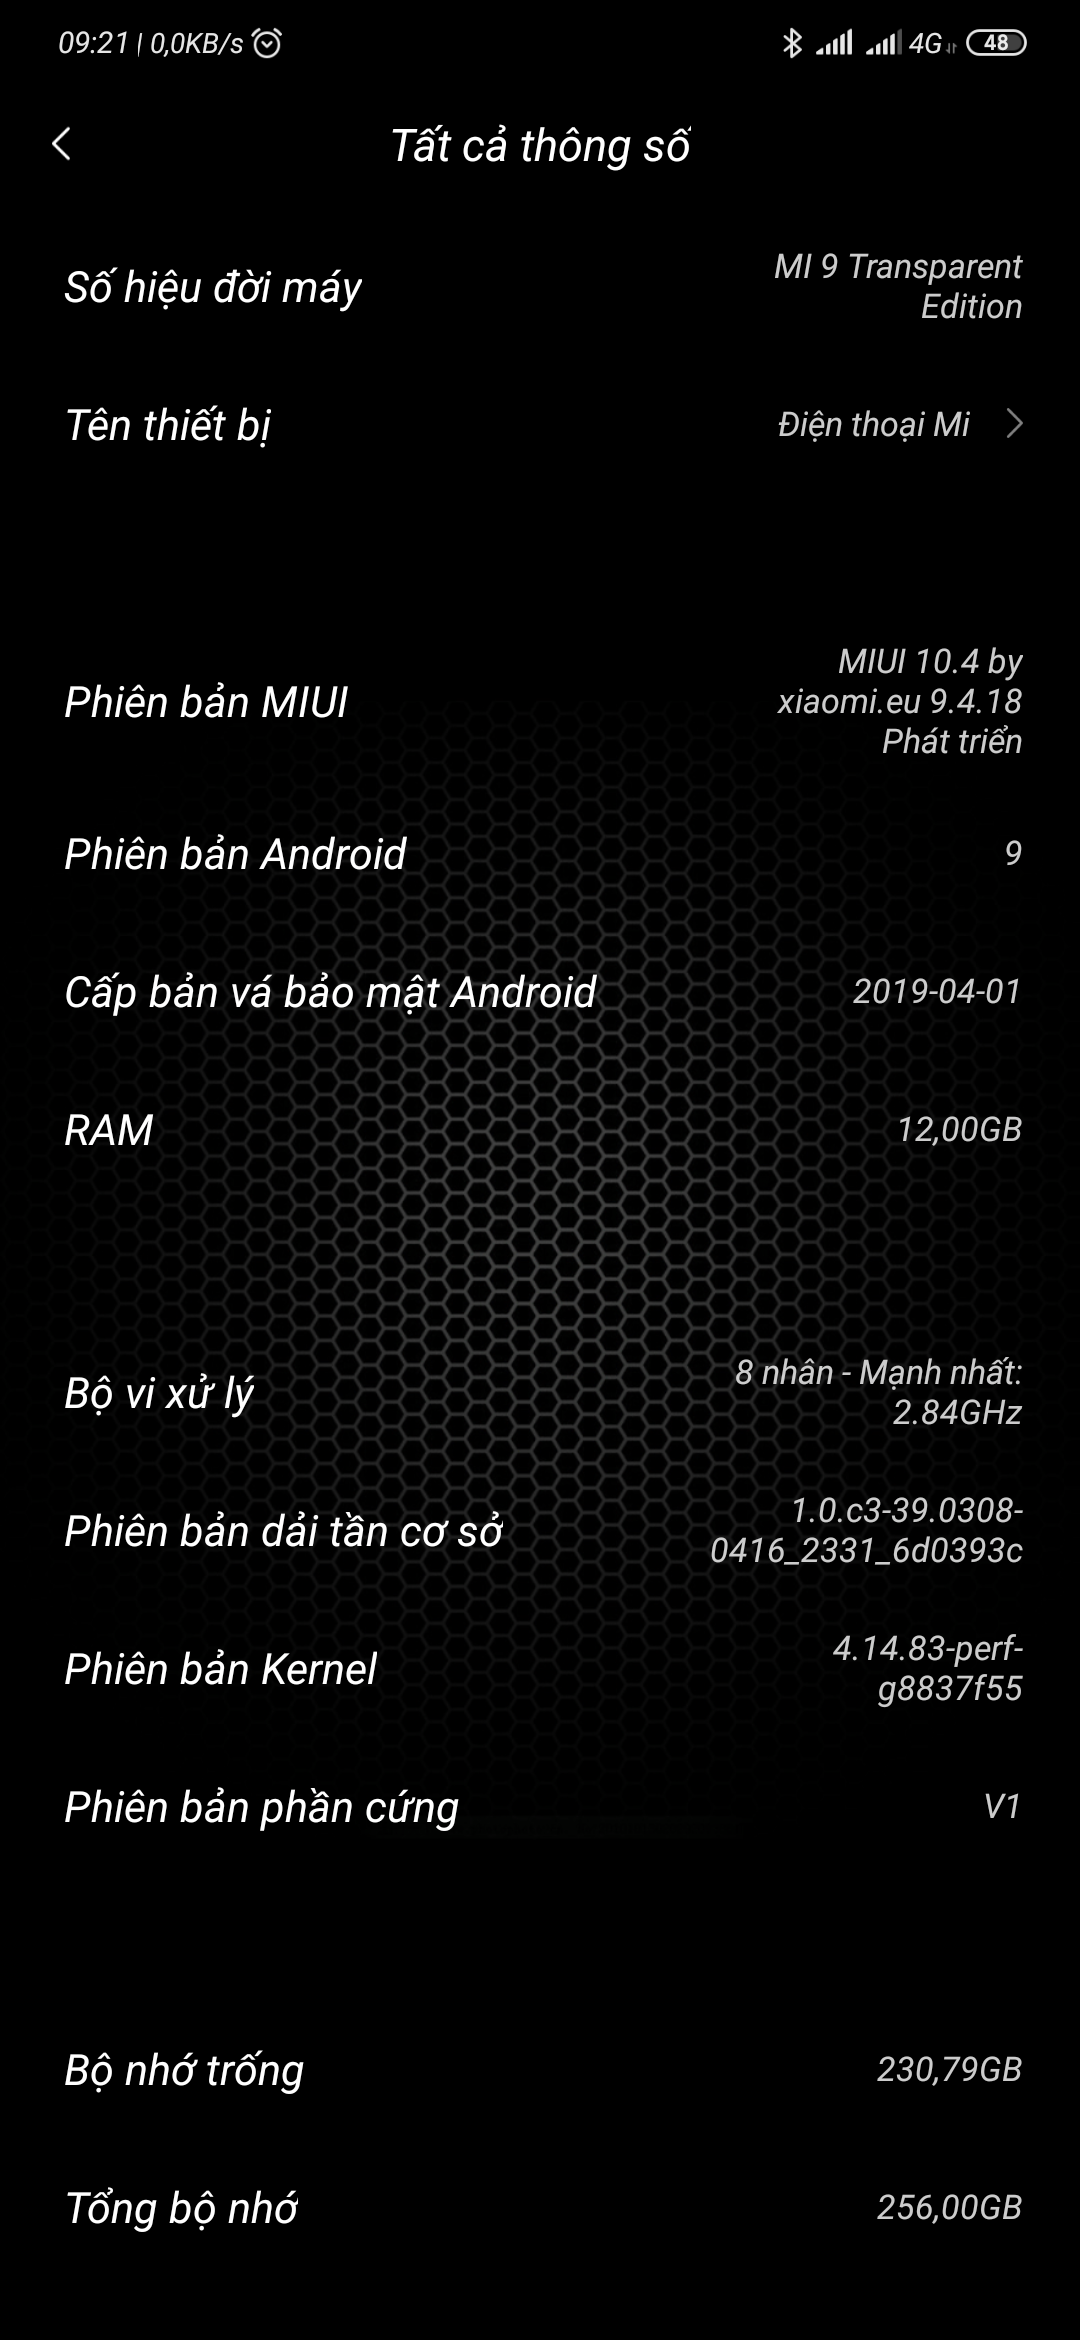 ROM][PORT][STABLE][G4/PLUS] MIUI 8 for athene[20/12/2016]